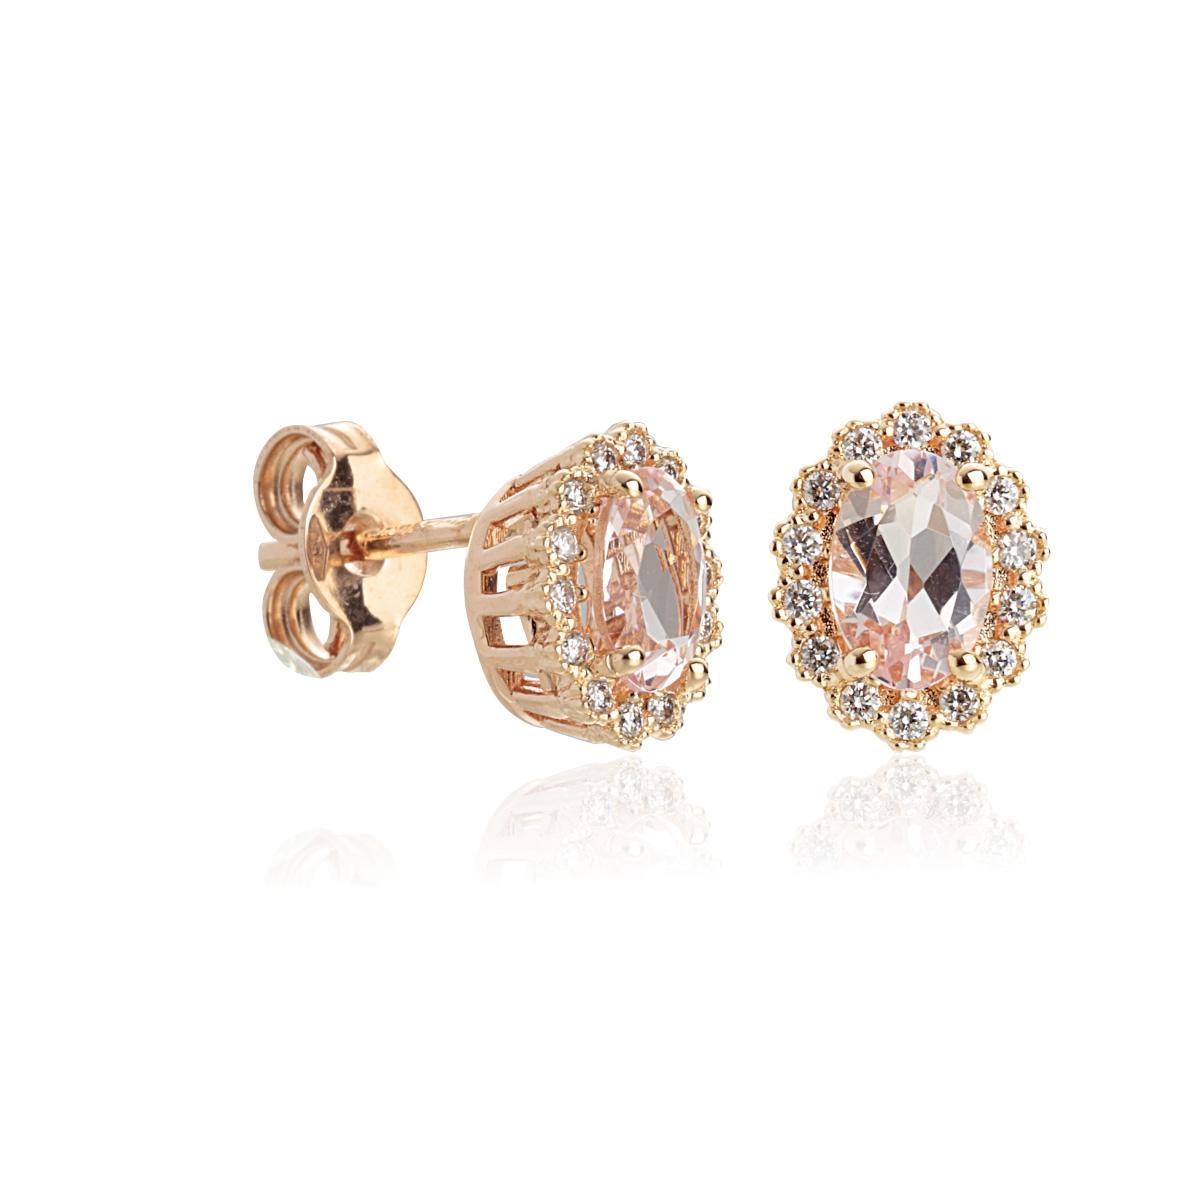 18kt gold earrings with Diamonds and Morganite - OD438/MO-LR